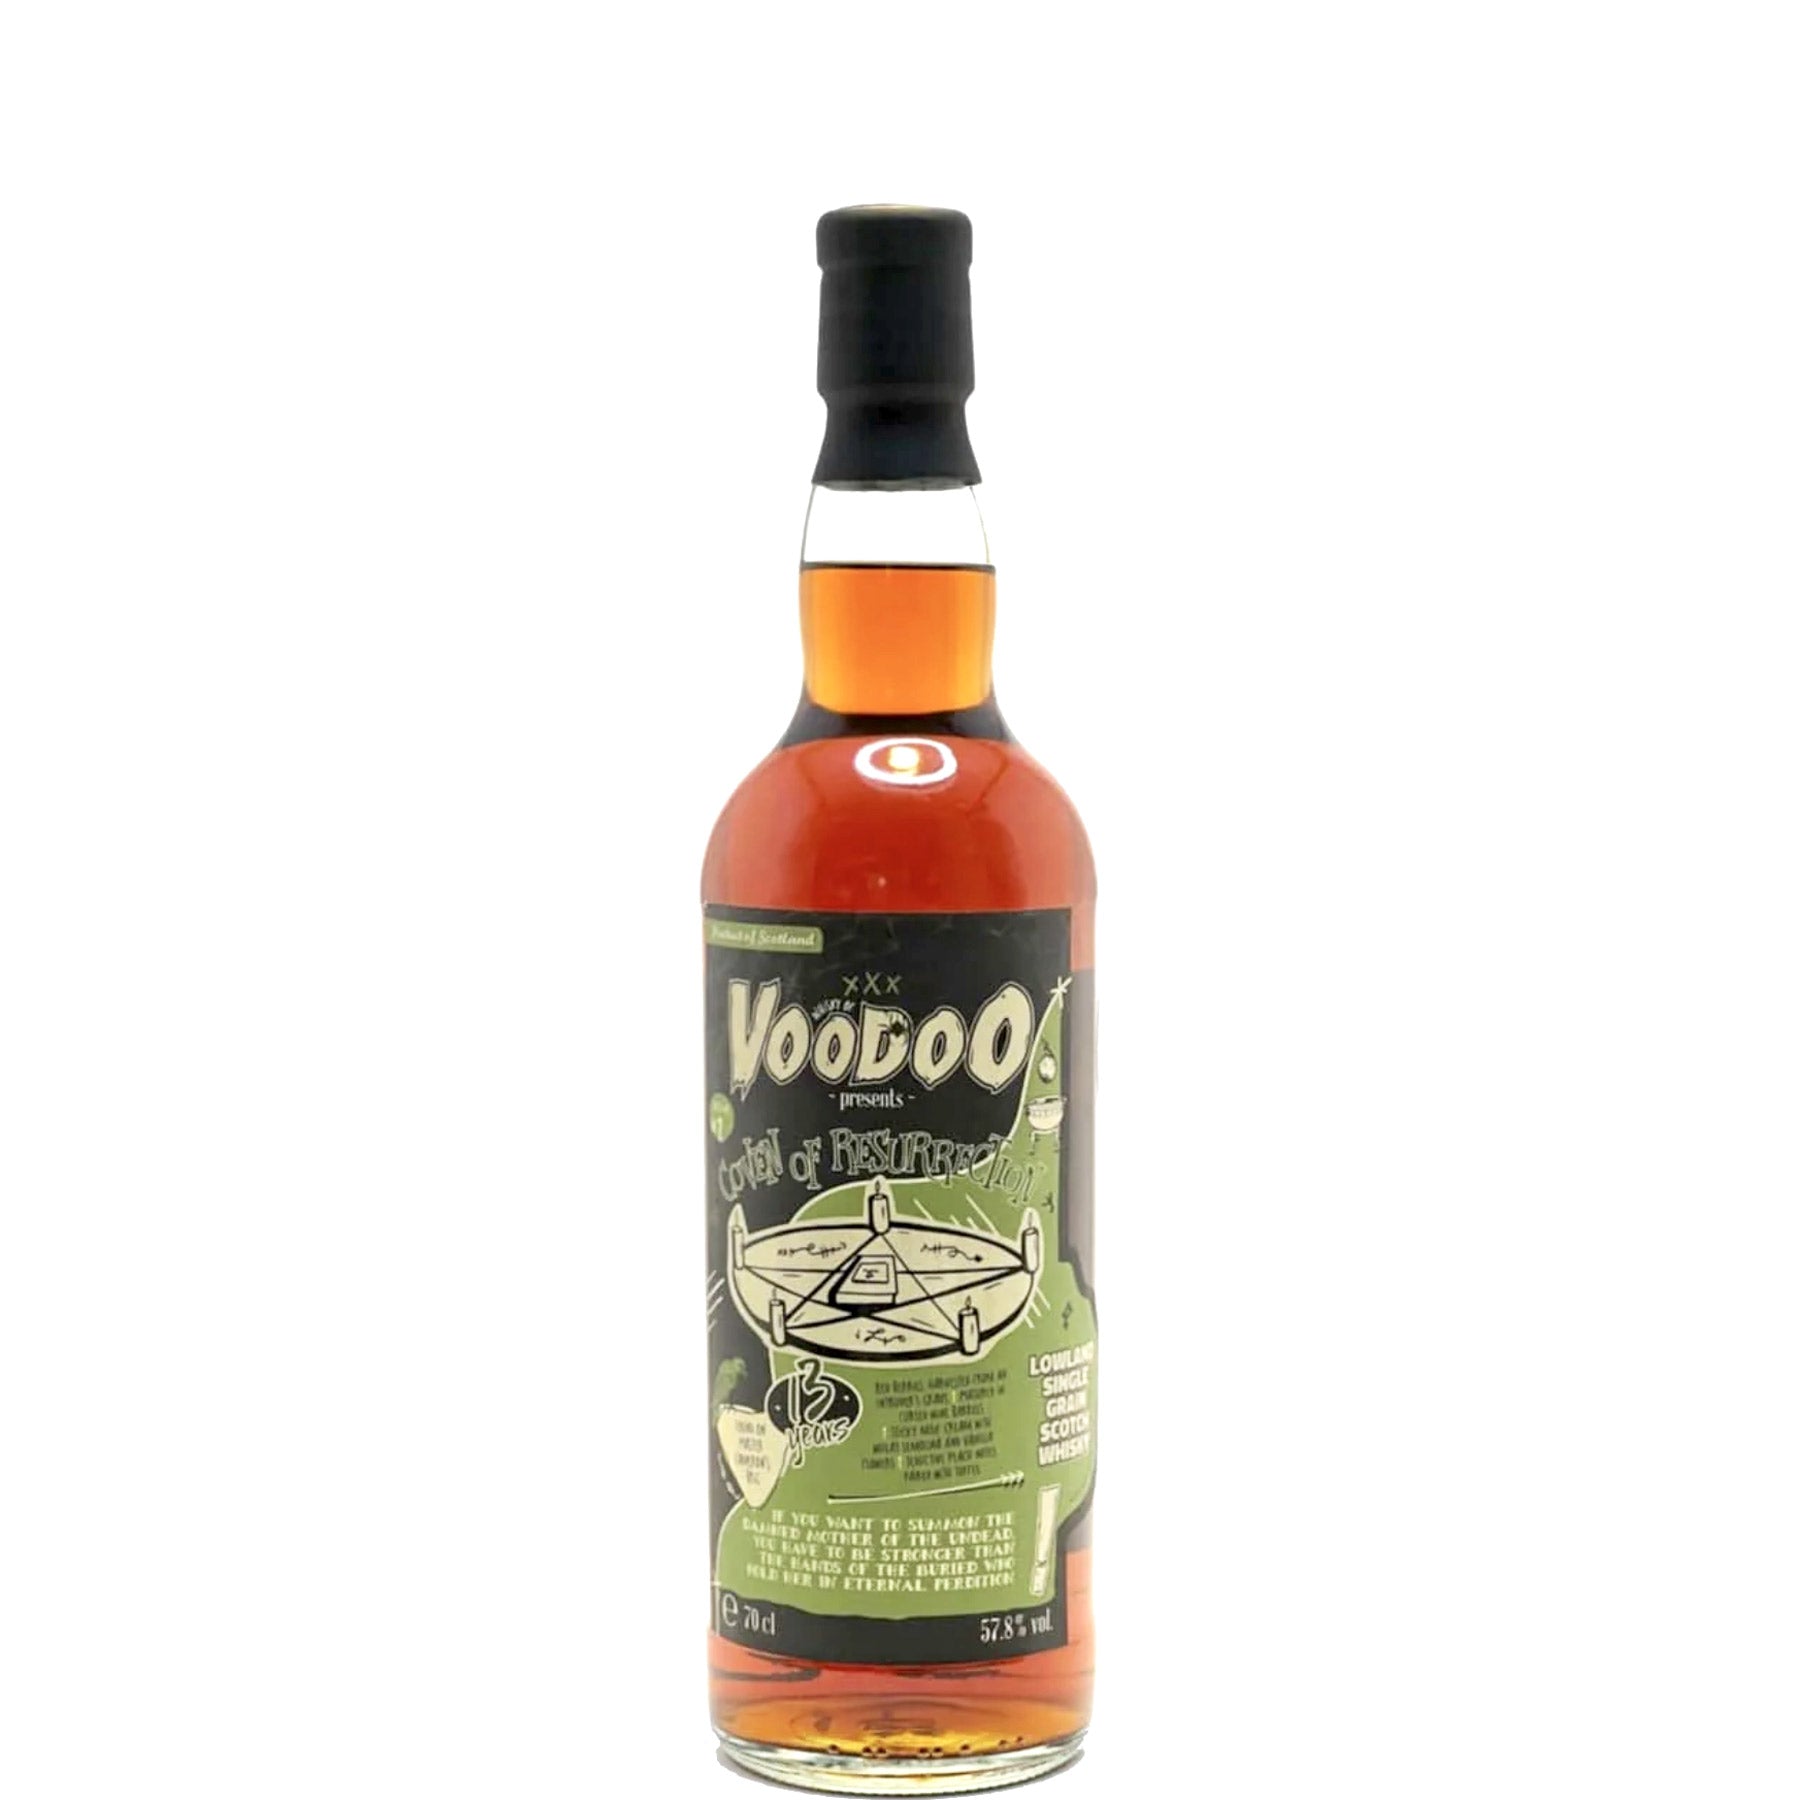 Whisky Of Voodoo 'The Coven of Ressurection' Lowland Single Grain 13yo, 2009 - 70cl